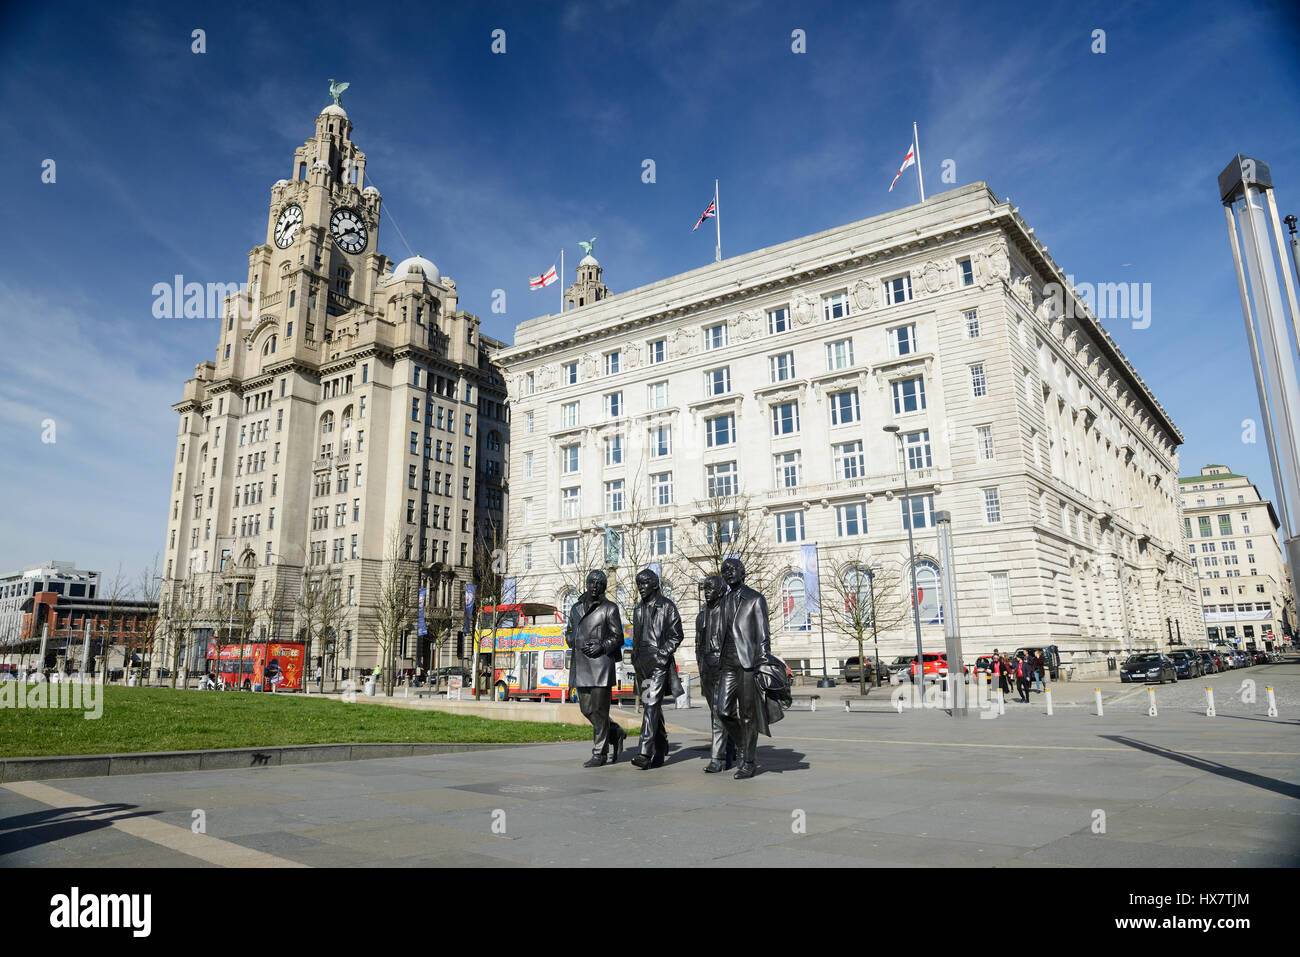 Statues of the famous Liverpool Group The Beatles situated in front of the iconic buildings at Pier Head in Liverpool. The Royal Liver Building (left) Stock Photo